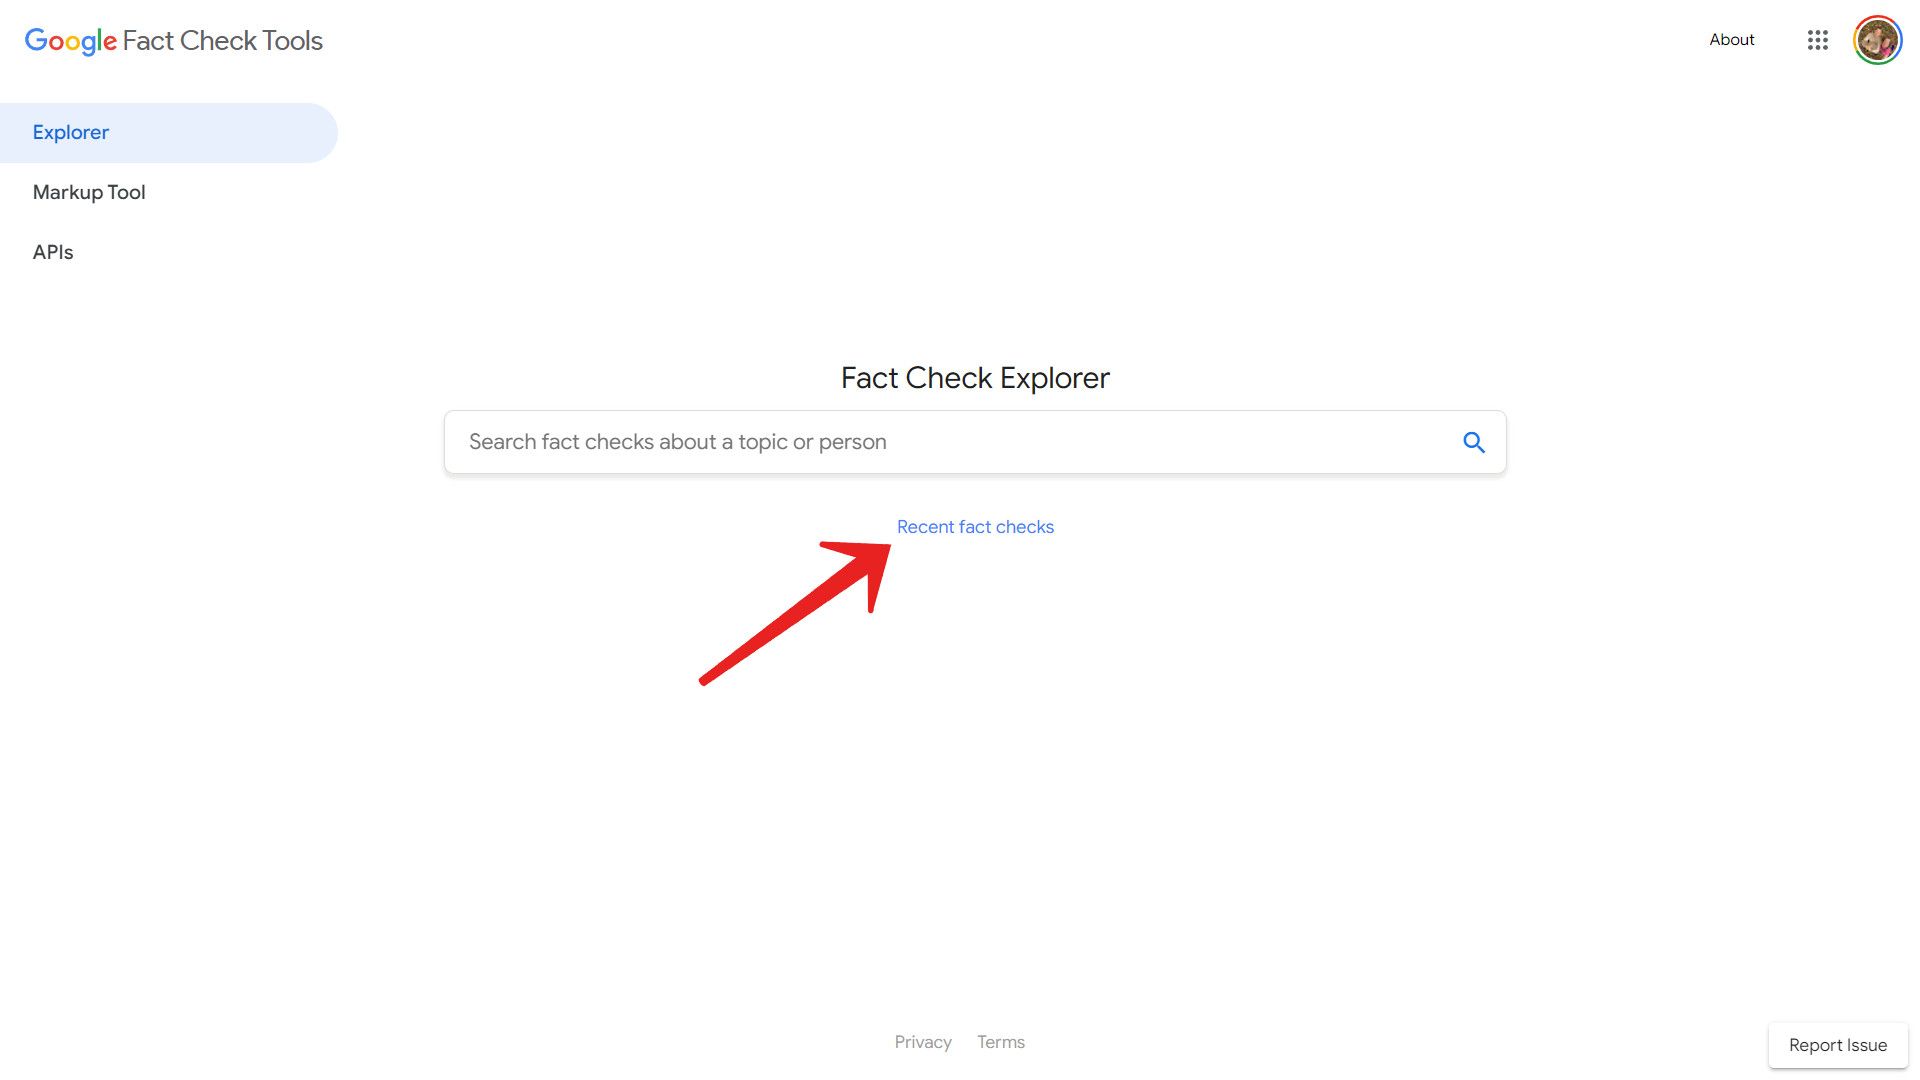 A screenshot of Google Fact Check Explorer with an arrow pointing to the Recent fact checks link.